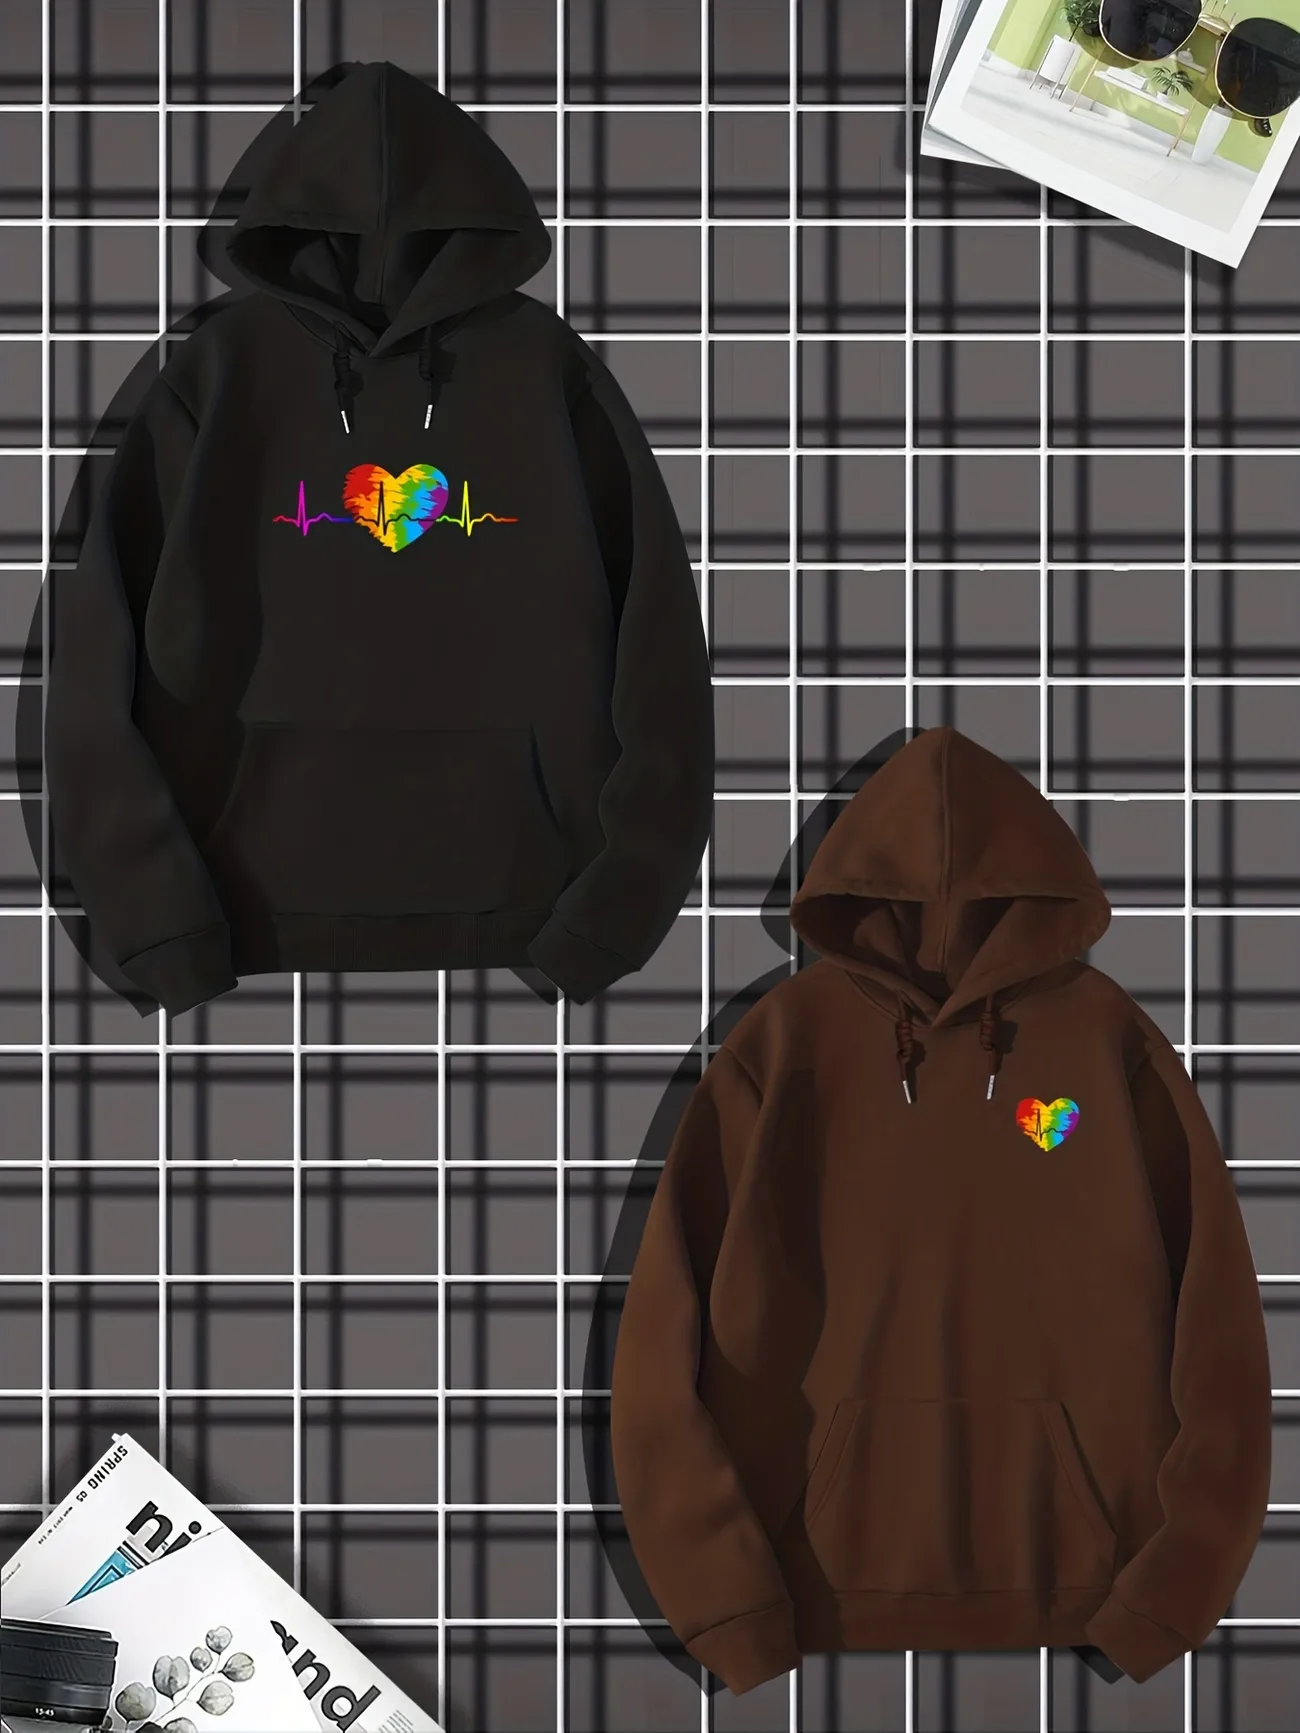 Mens 2pcs Hoodie Outfits Rainbow Heart Print 2pcs Pullover Hooded Sweatshirt  Set For Autumn Winter Mens Clothing, 24/7 Customer Service